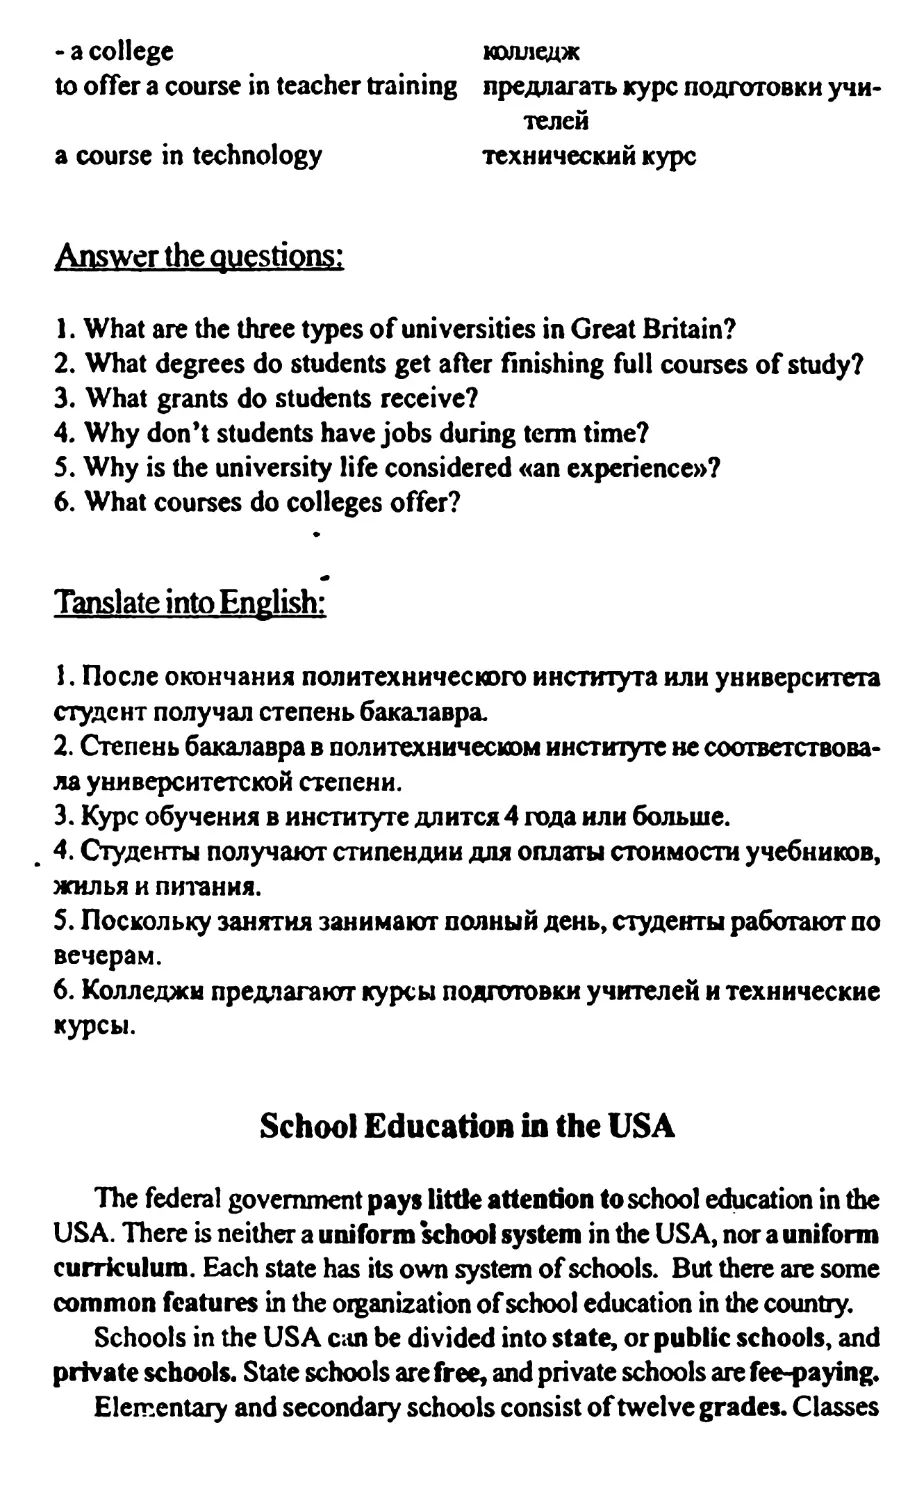 School Education in the USA